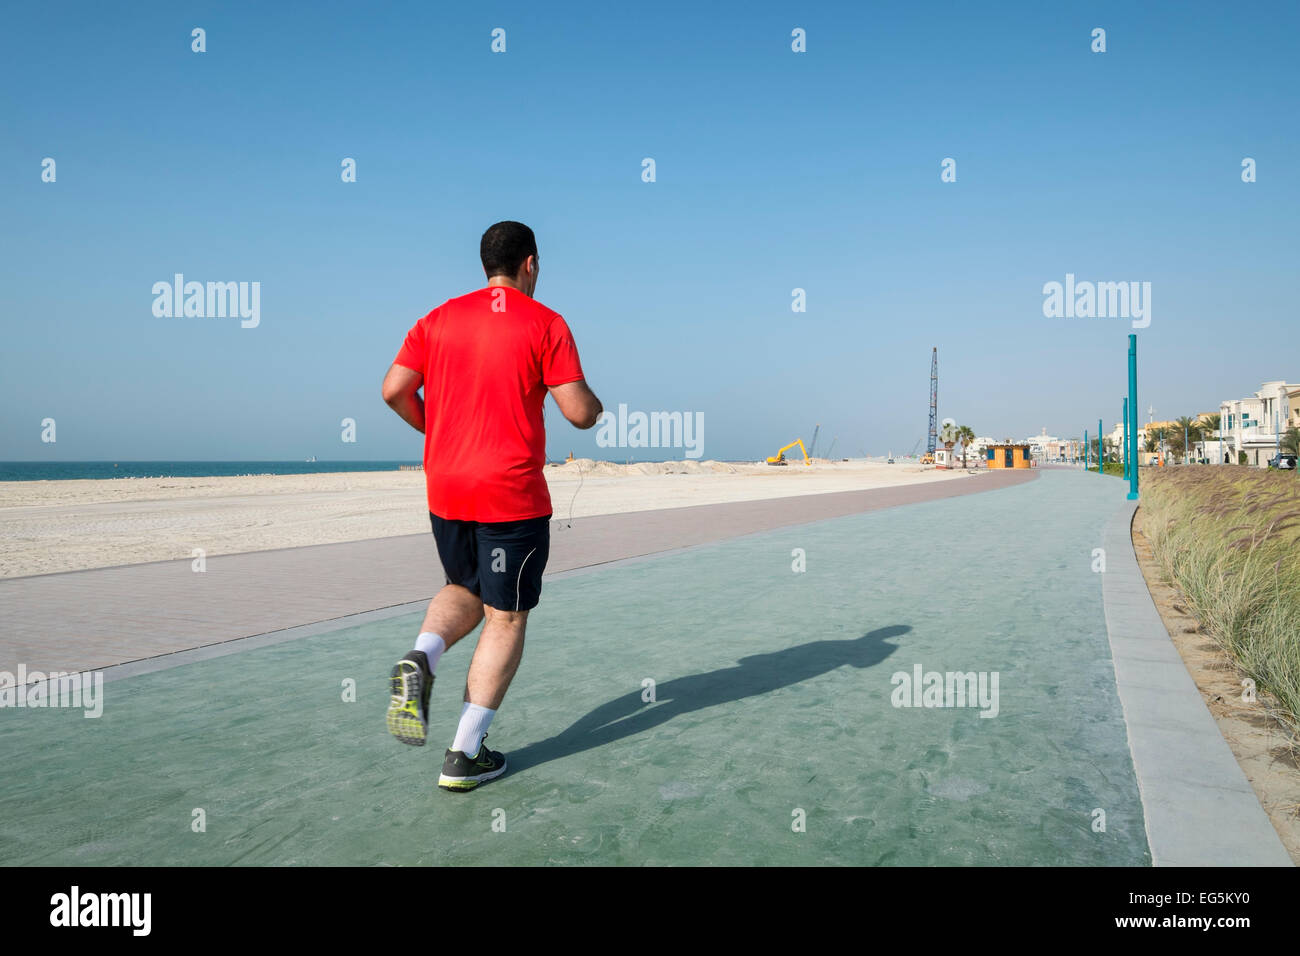 Man jogging on new redeveloped jogging and walking track along beach at Umm Suqueim  in Dubai United Arab Emirates Stock Photo